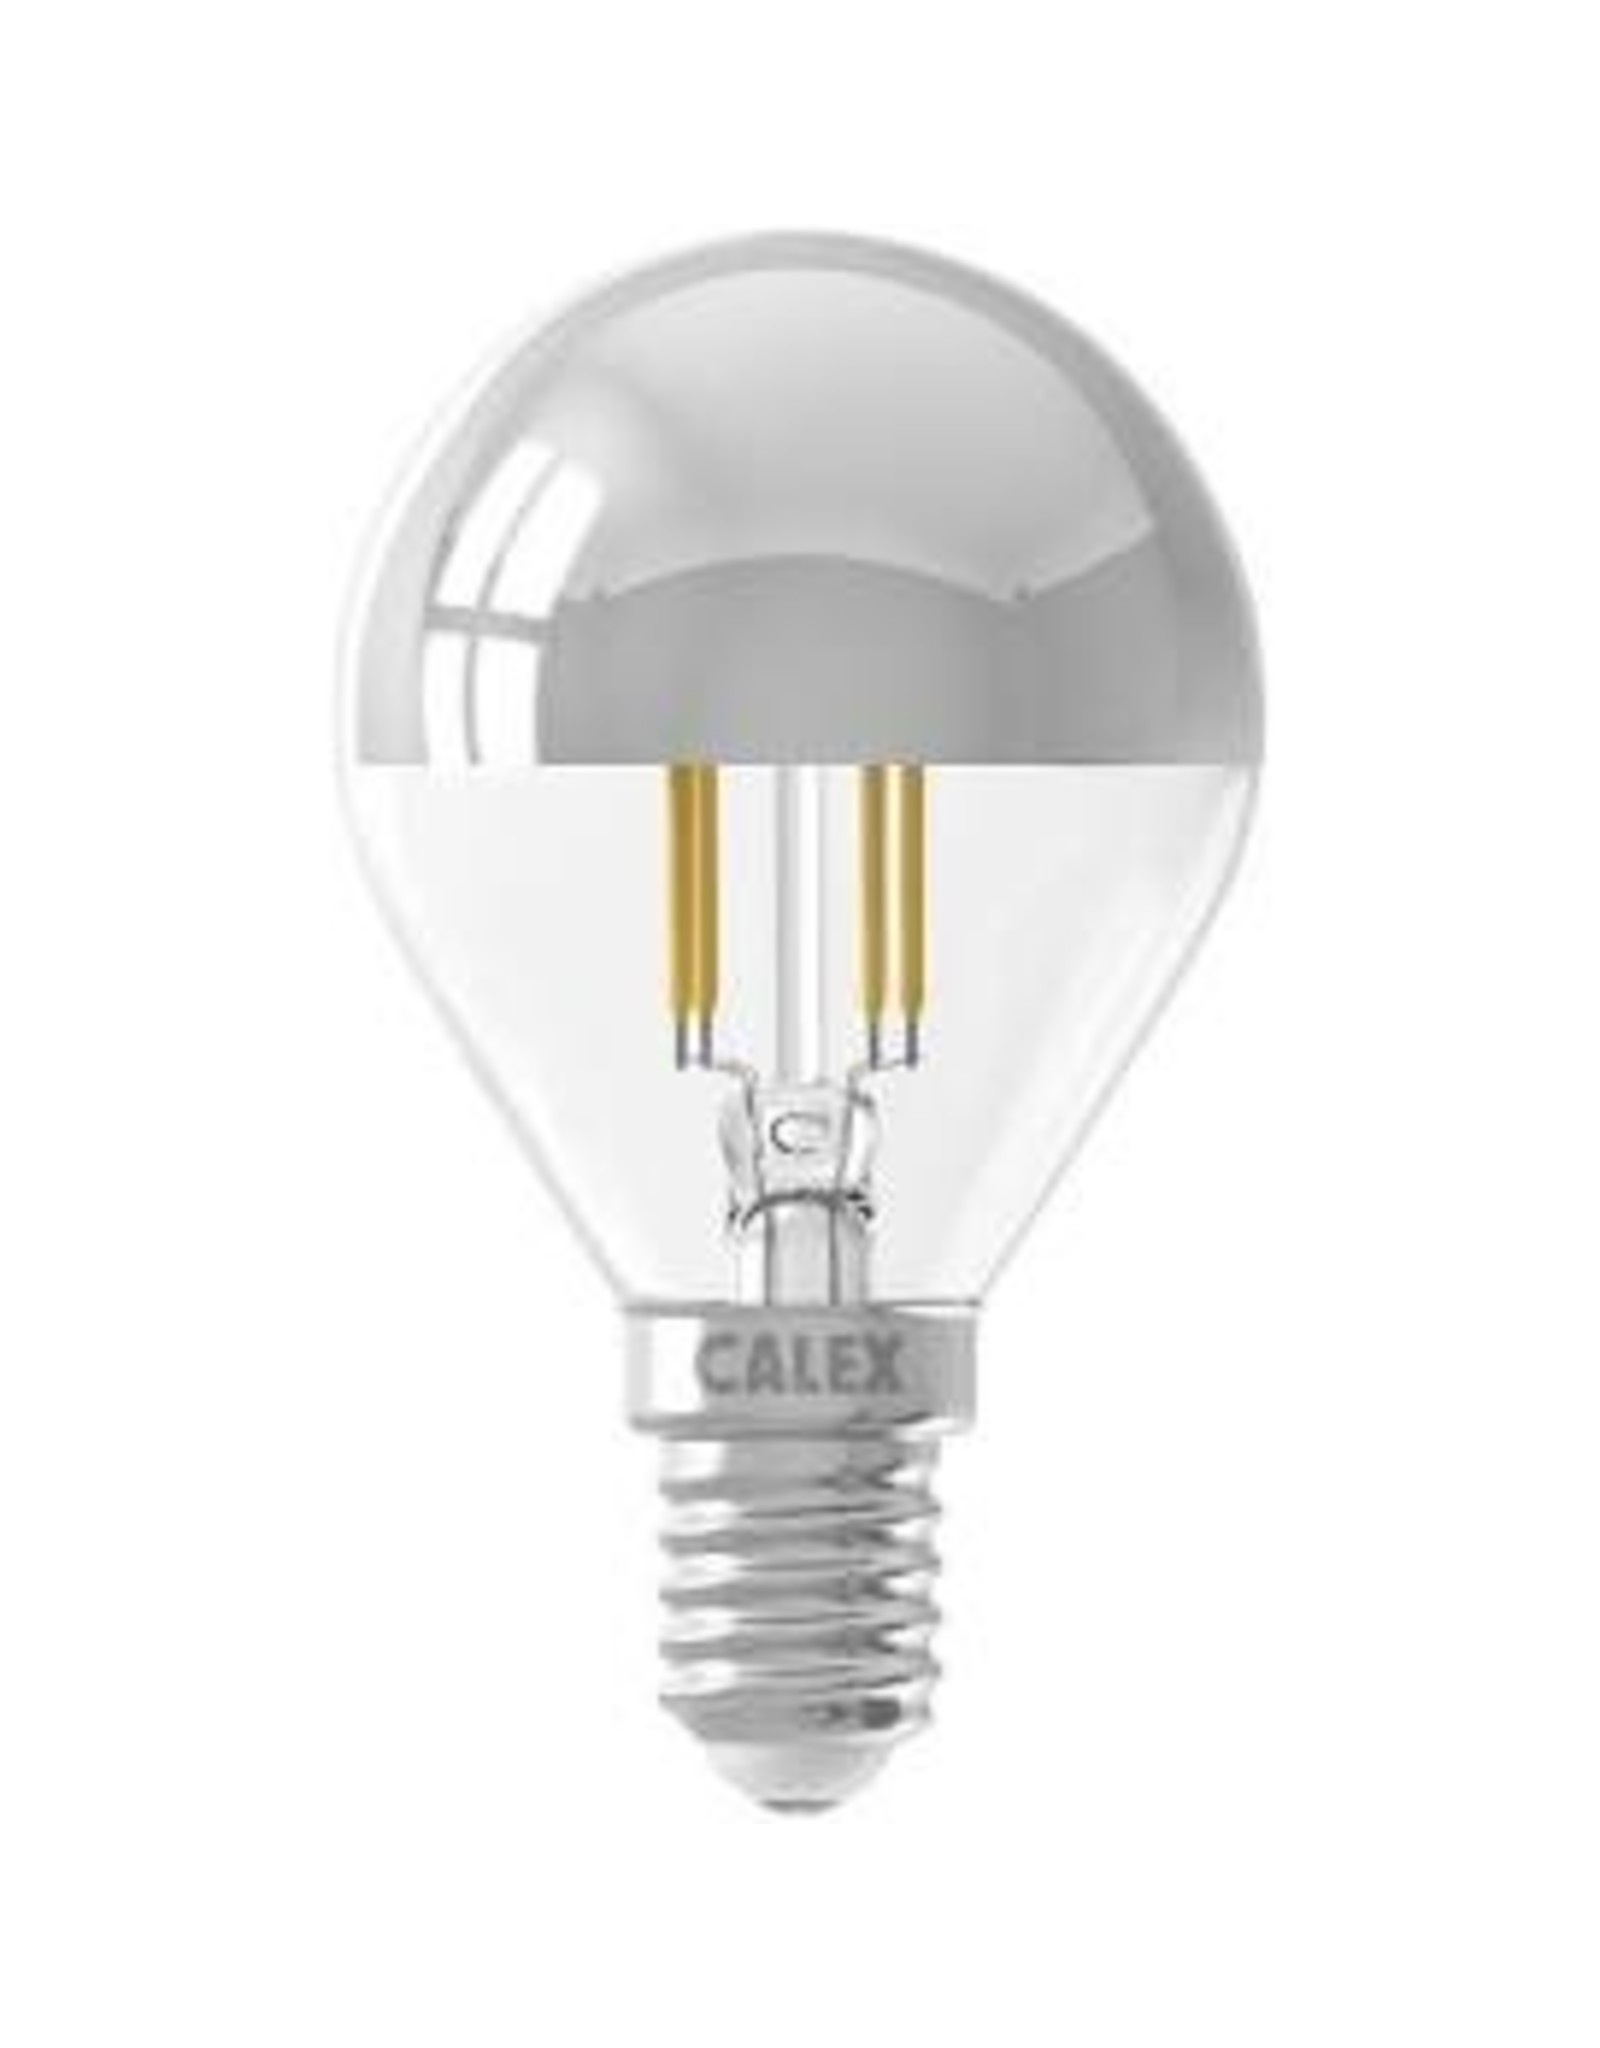 Calex Top mirror P45 Chrome Straight filament 220-240V 3.5W 250lm 2700K E14 dimmable via LED dimmer